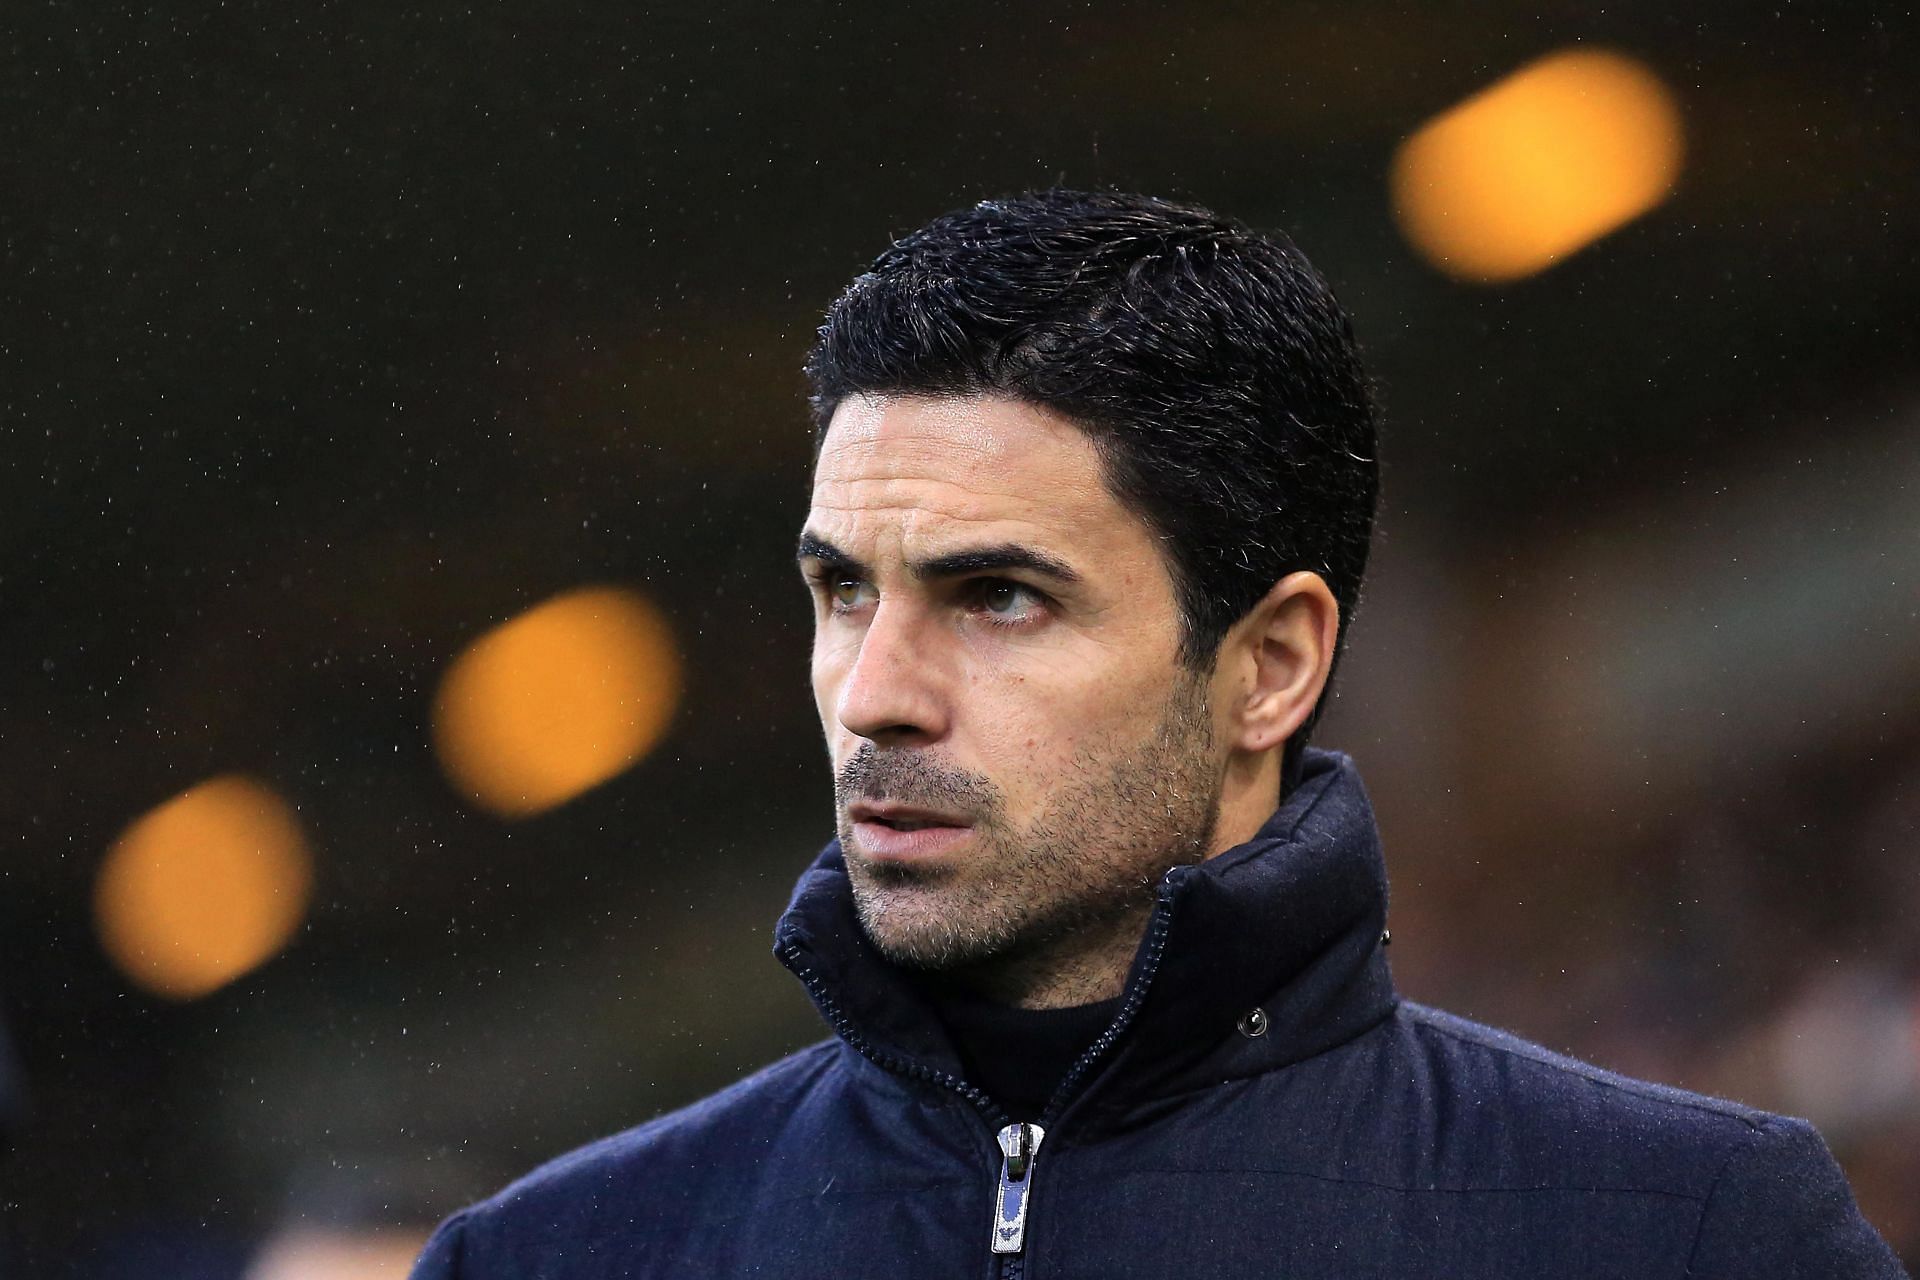 Arsenal manager Mikel Arteta will face Nottingham Forest on Sunday in the FA Cup.